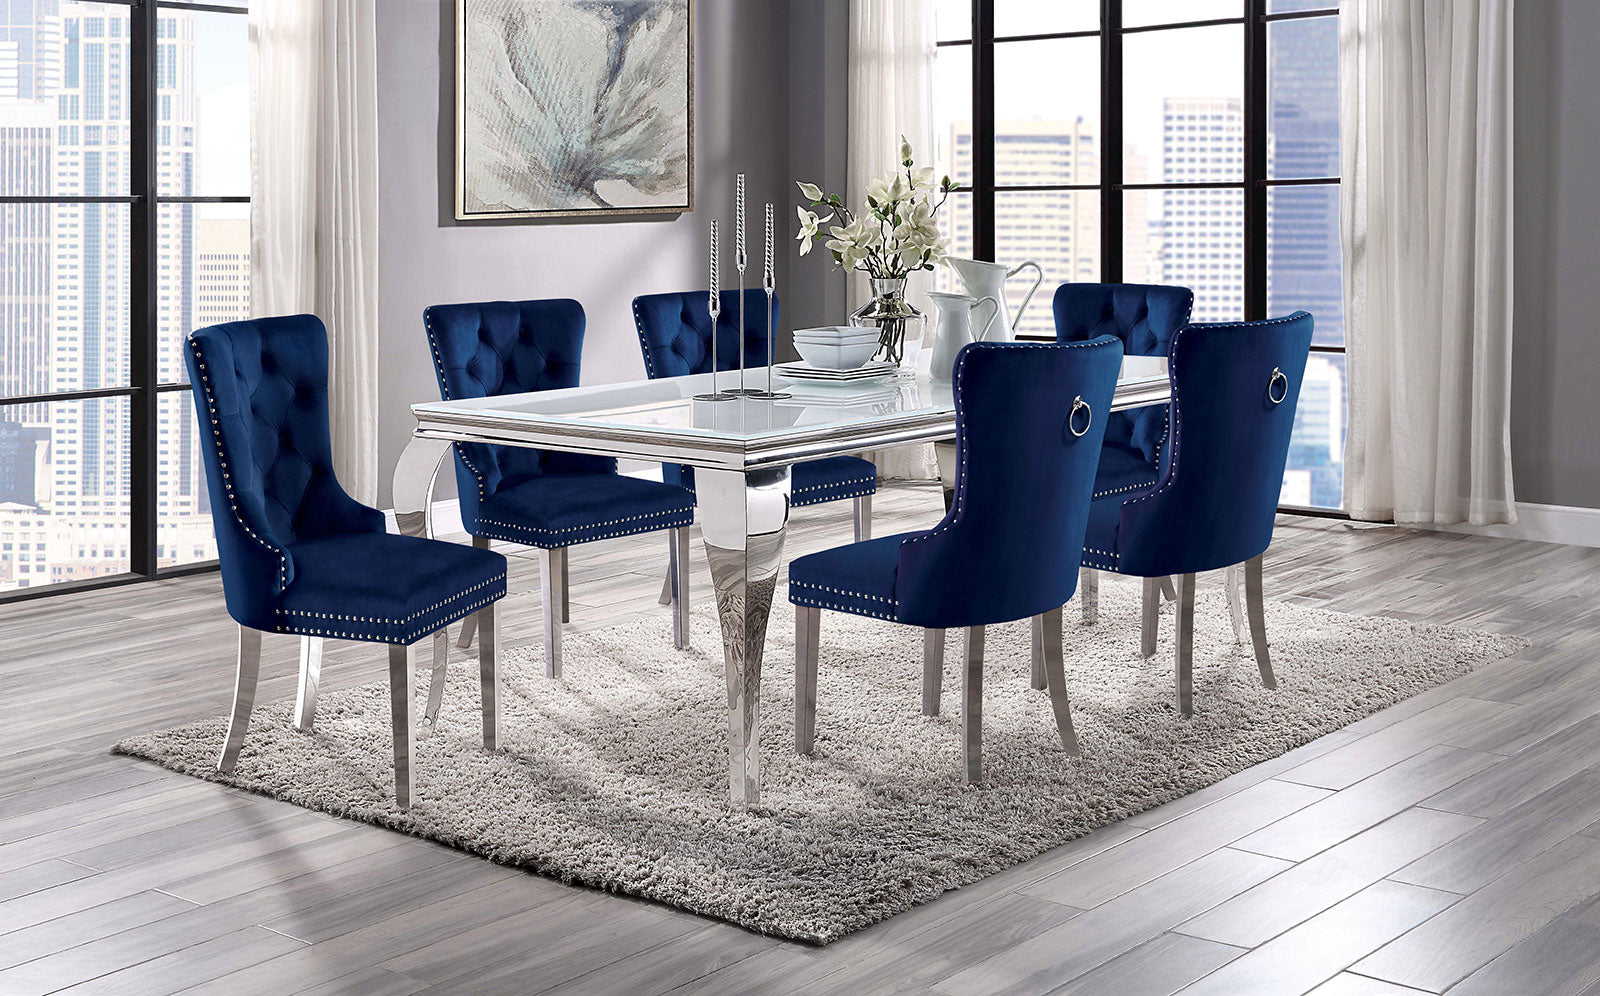 NEUVEVILLE 7 Pc. Dining Table Set, Navy Chairs